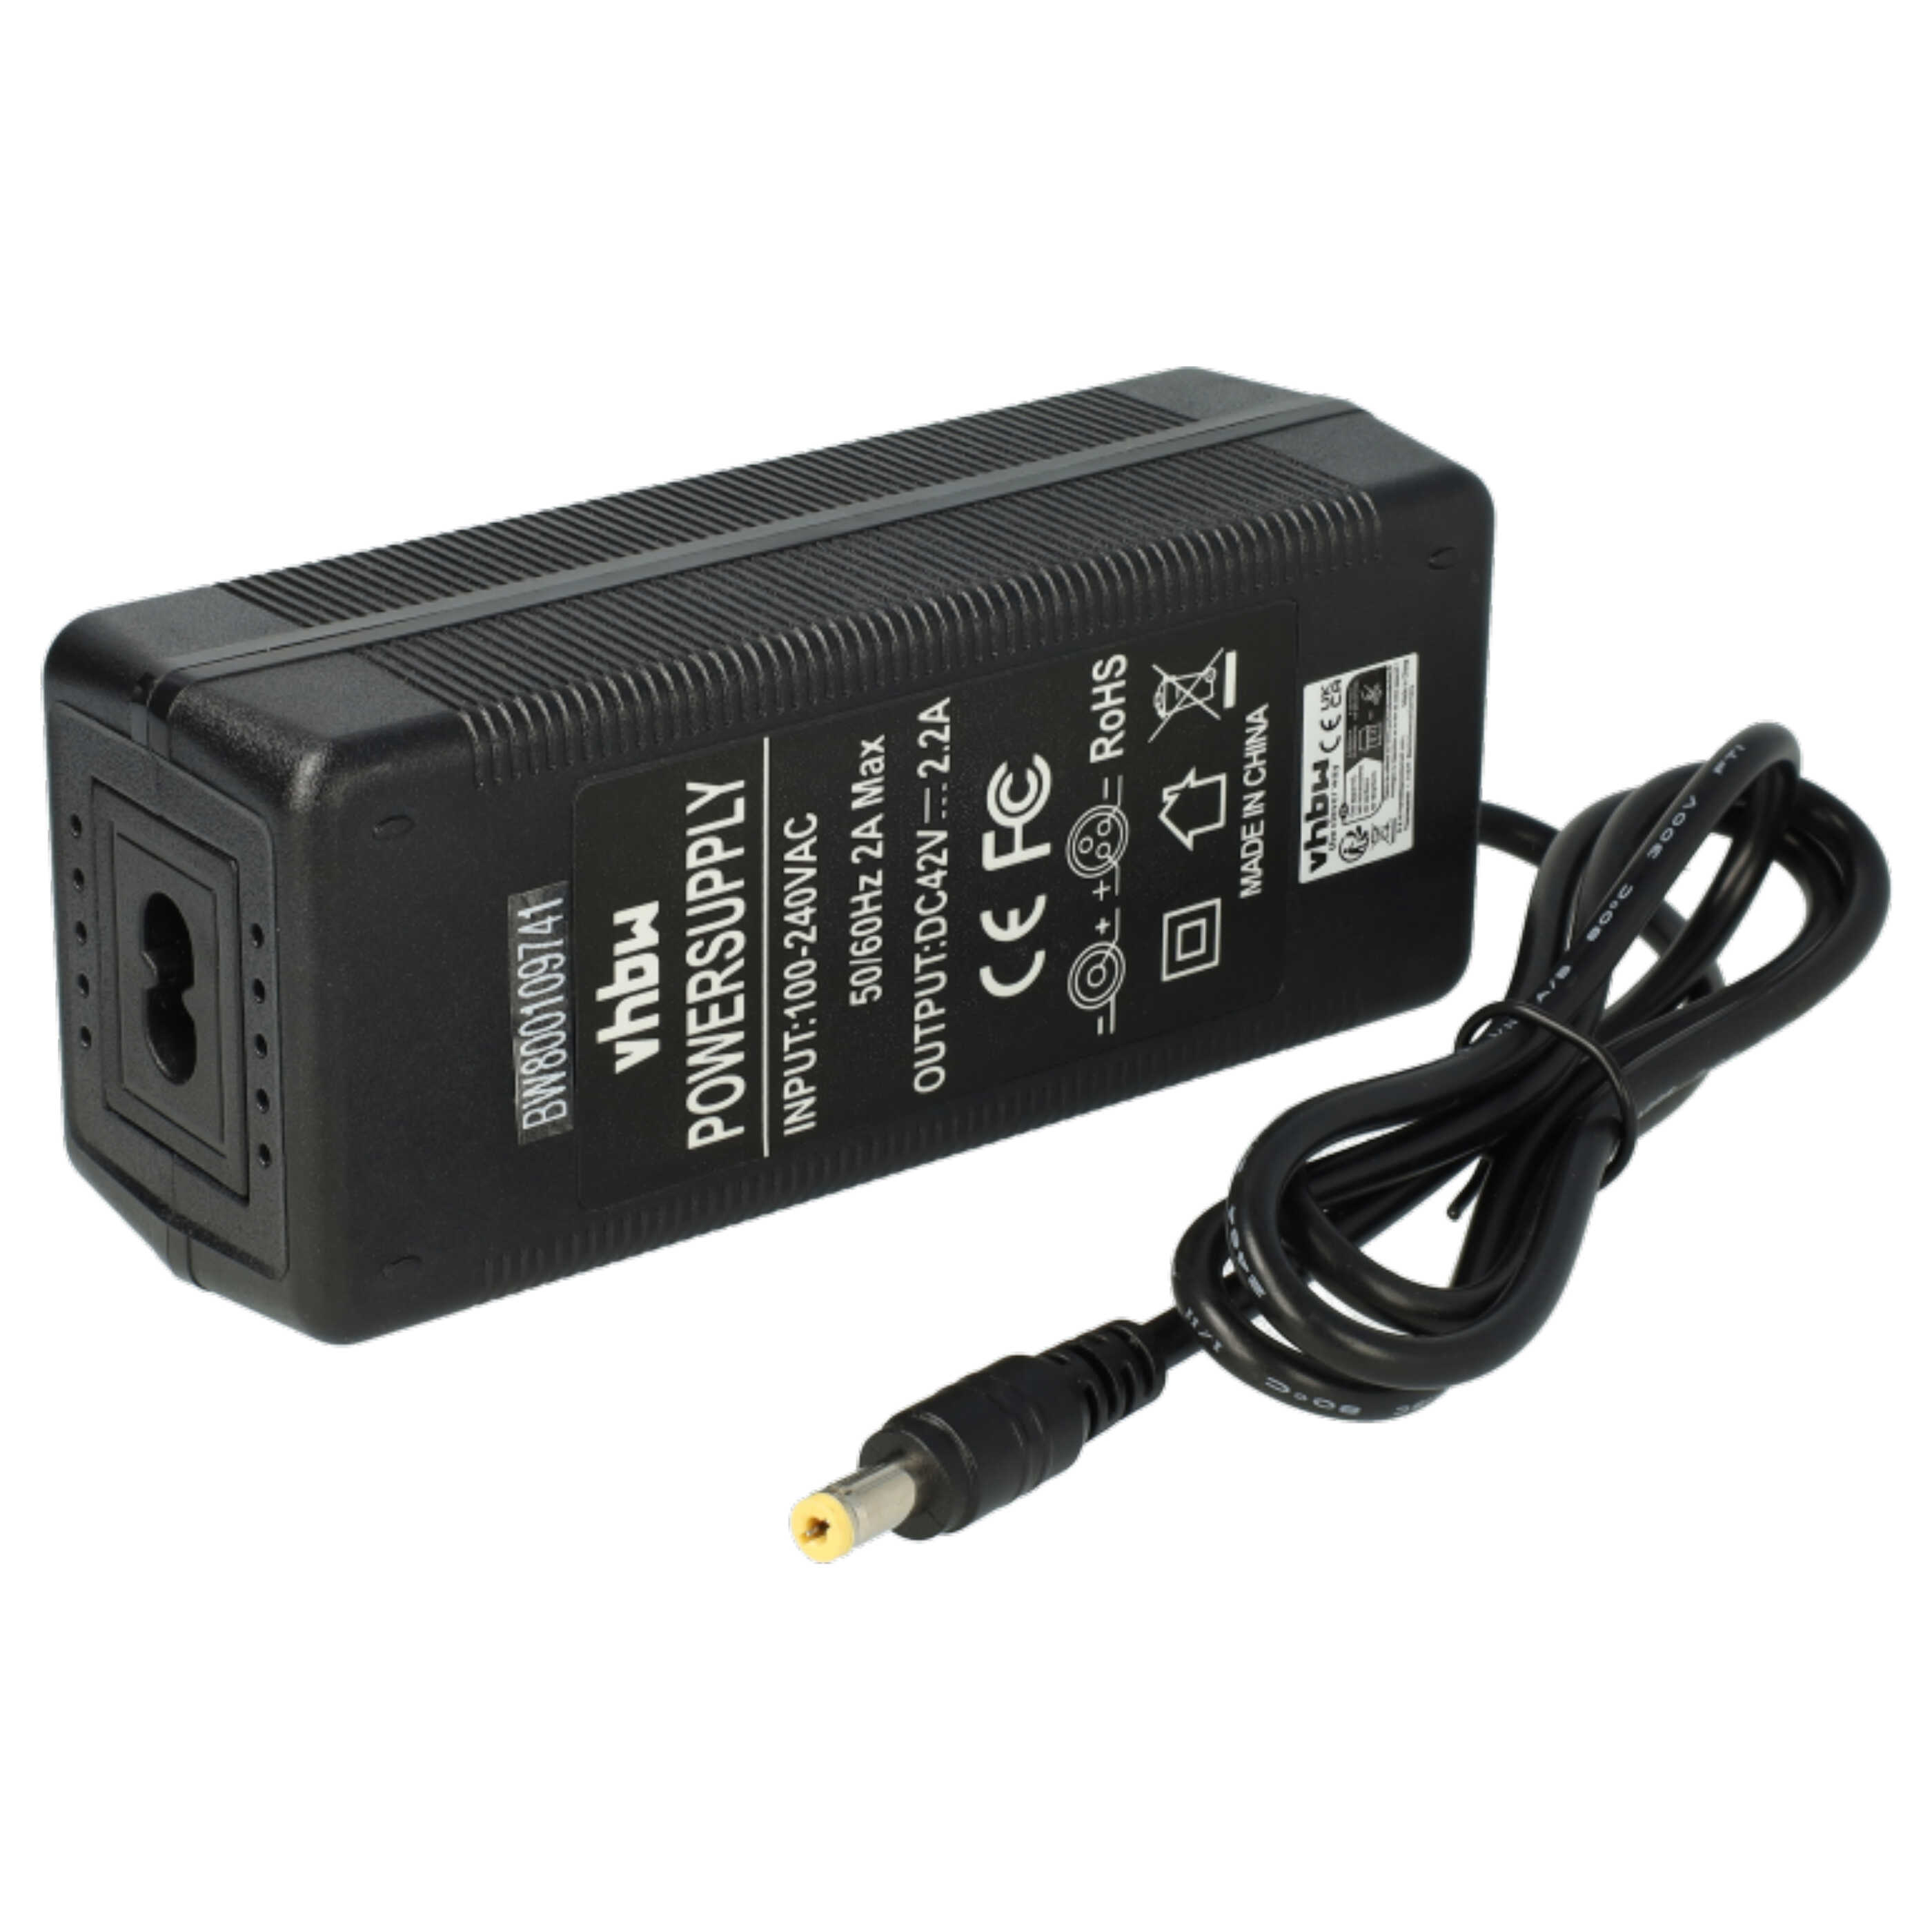 Charger suitable for E-Bike Battery - With Round Plug, 2.2 A